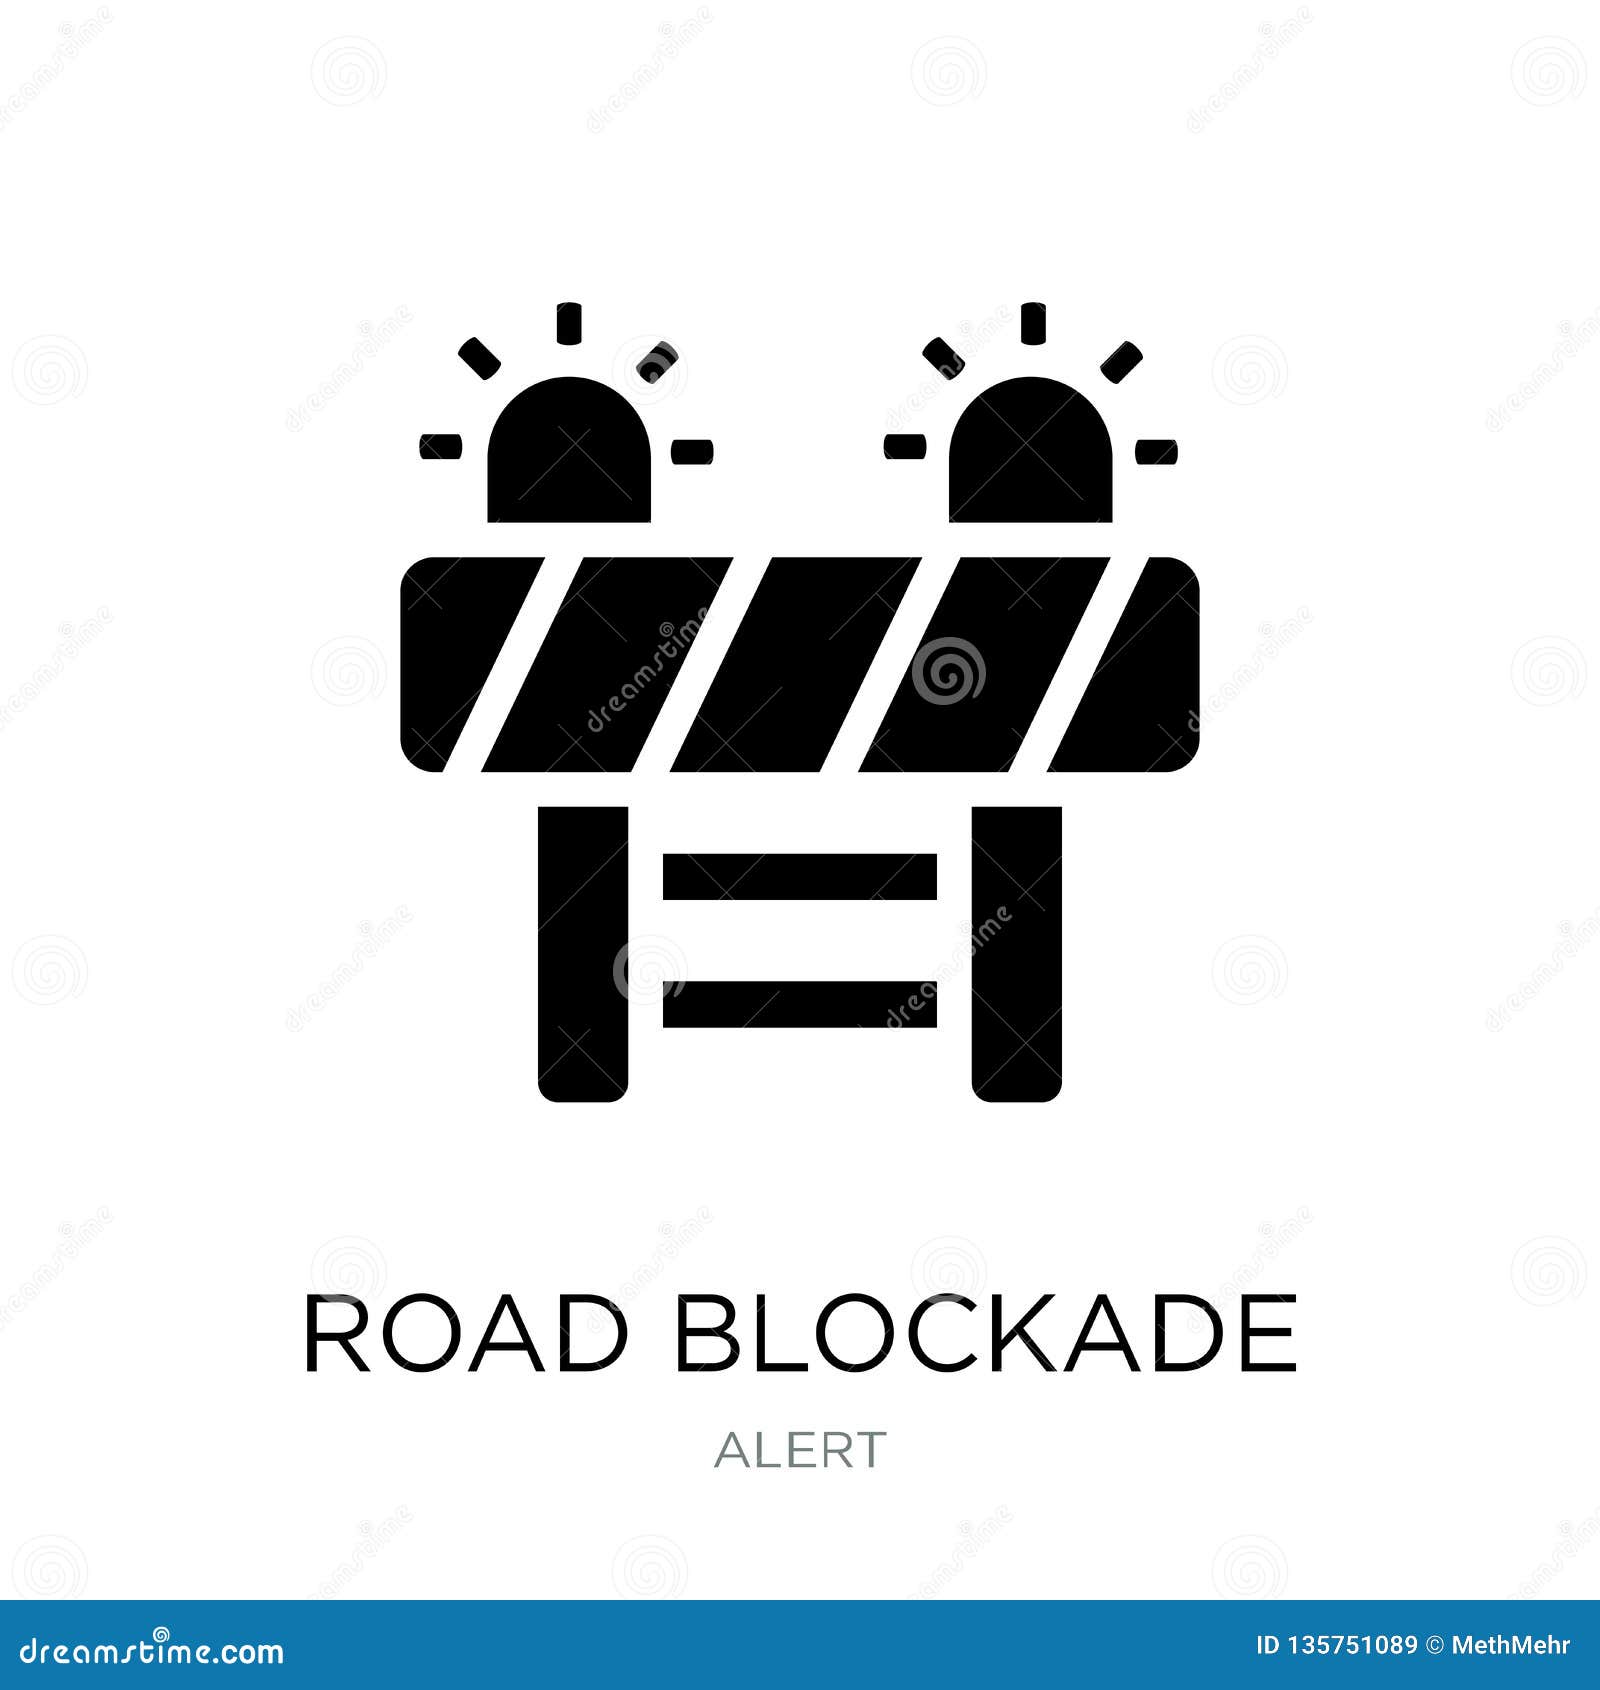 road blockade icon in trendy  style. road blockade icon  on white background. road blockade  icon simple and